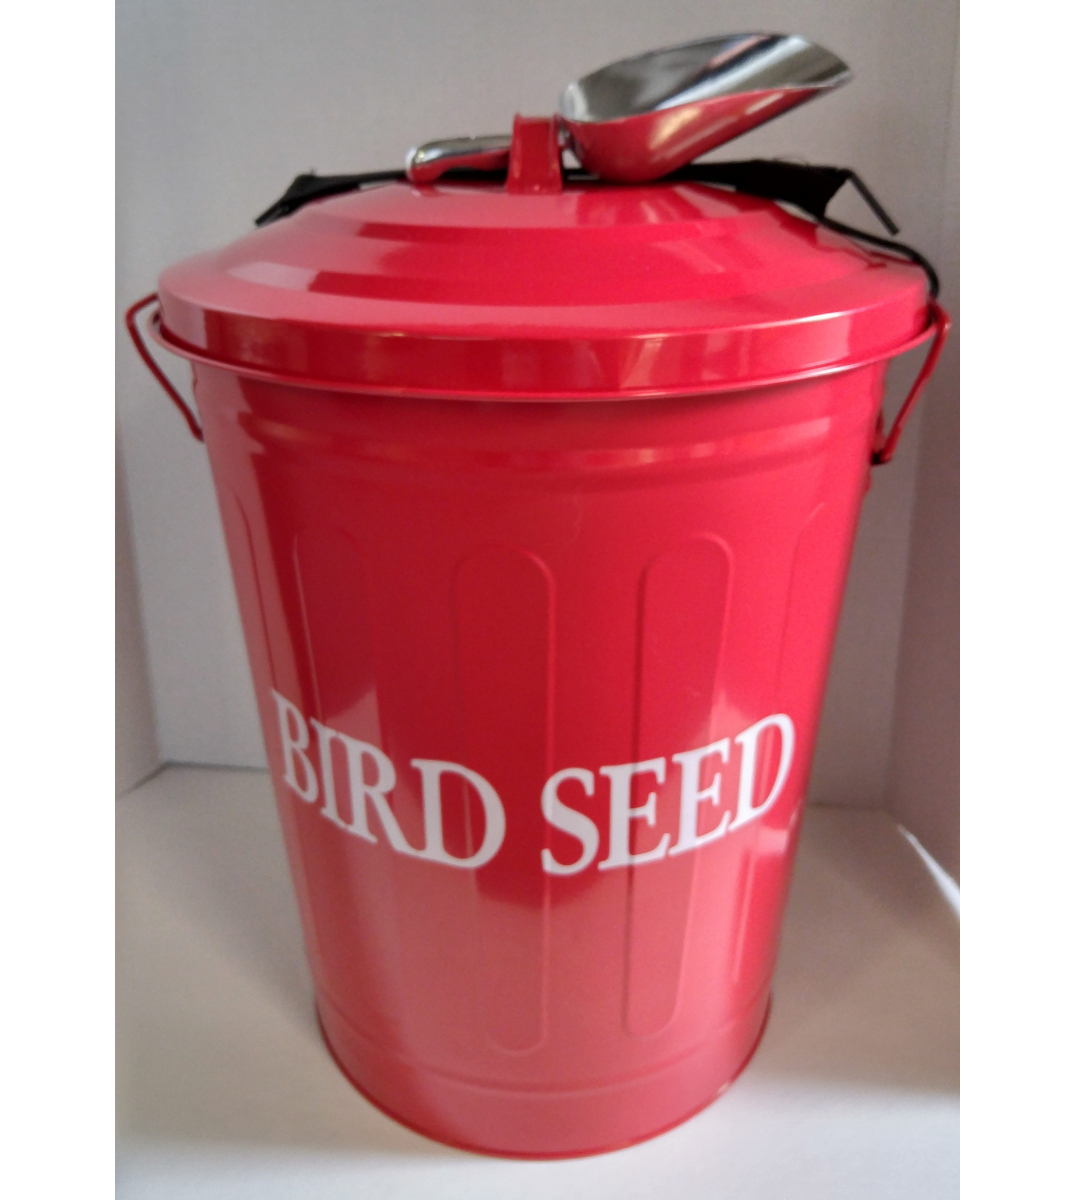 Bird Seed Storage Containers Large Set of 3, Quality Metal Storage  Containers For Bird Seed and Pet Food at Fiddle Creek Farms